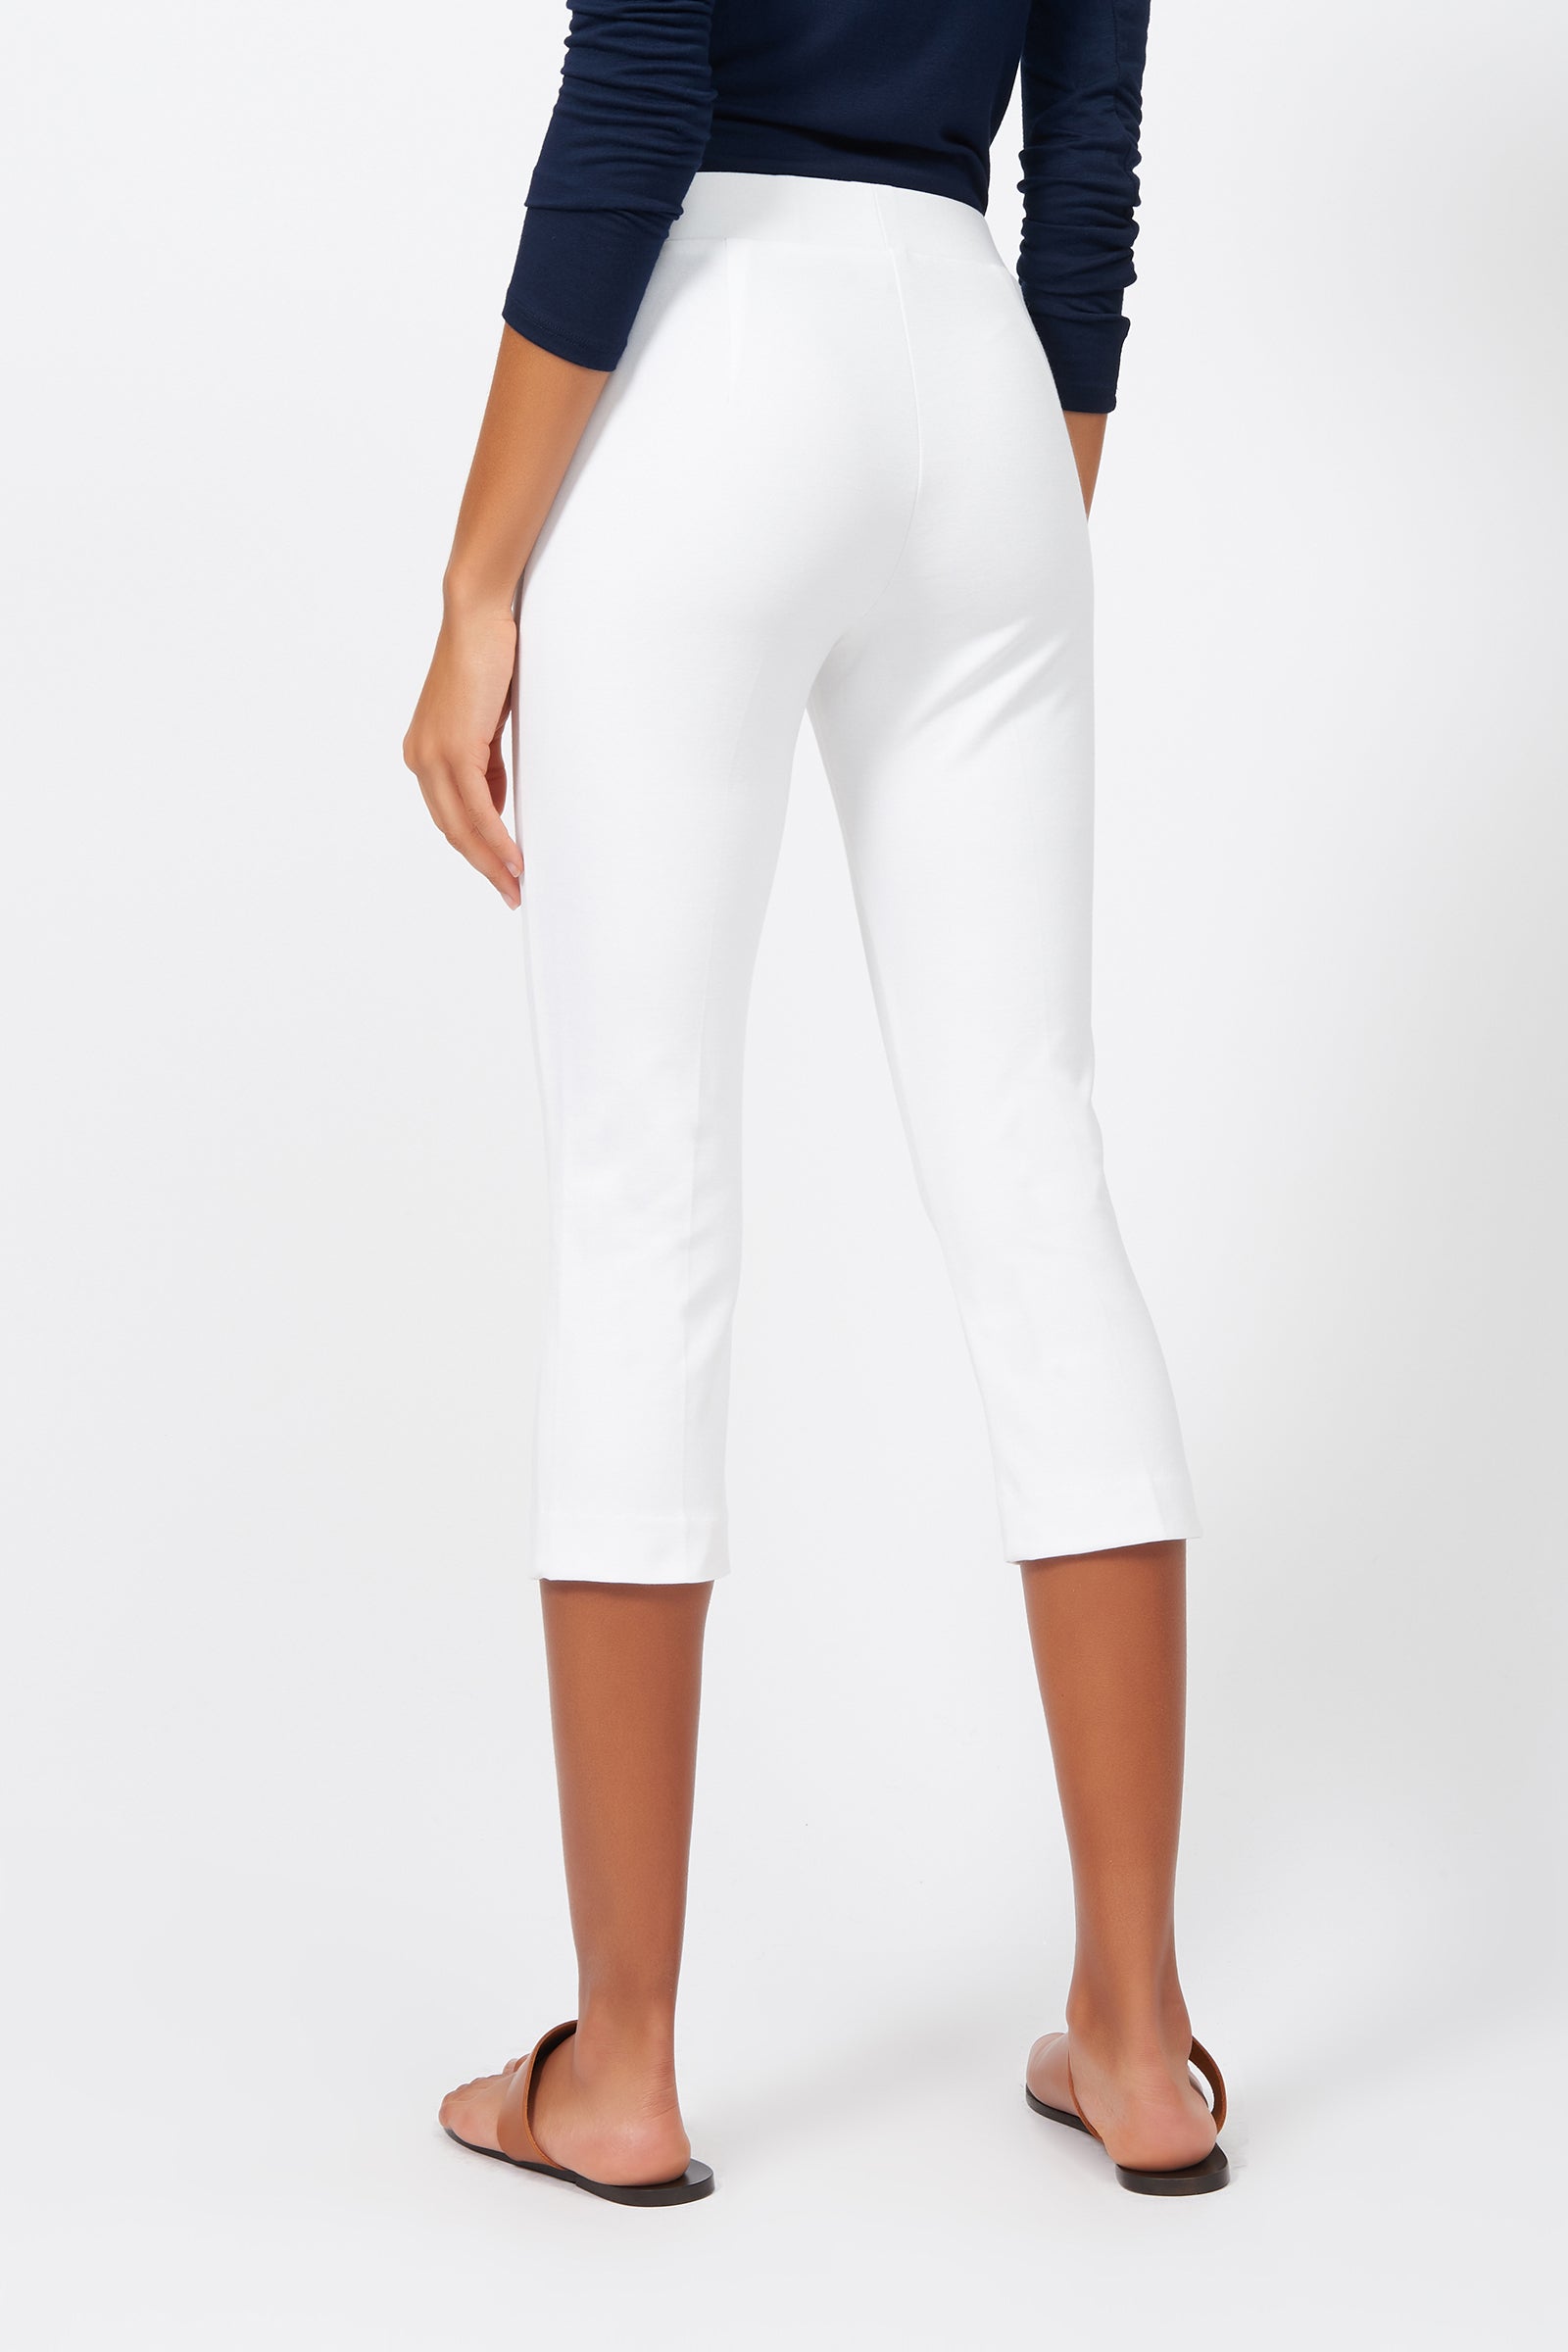 Kal Rieman Pintuck Ponte 3/4 Pant in White on Model Full Front View